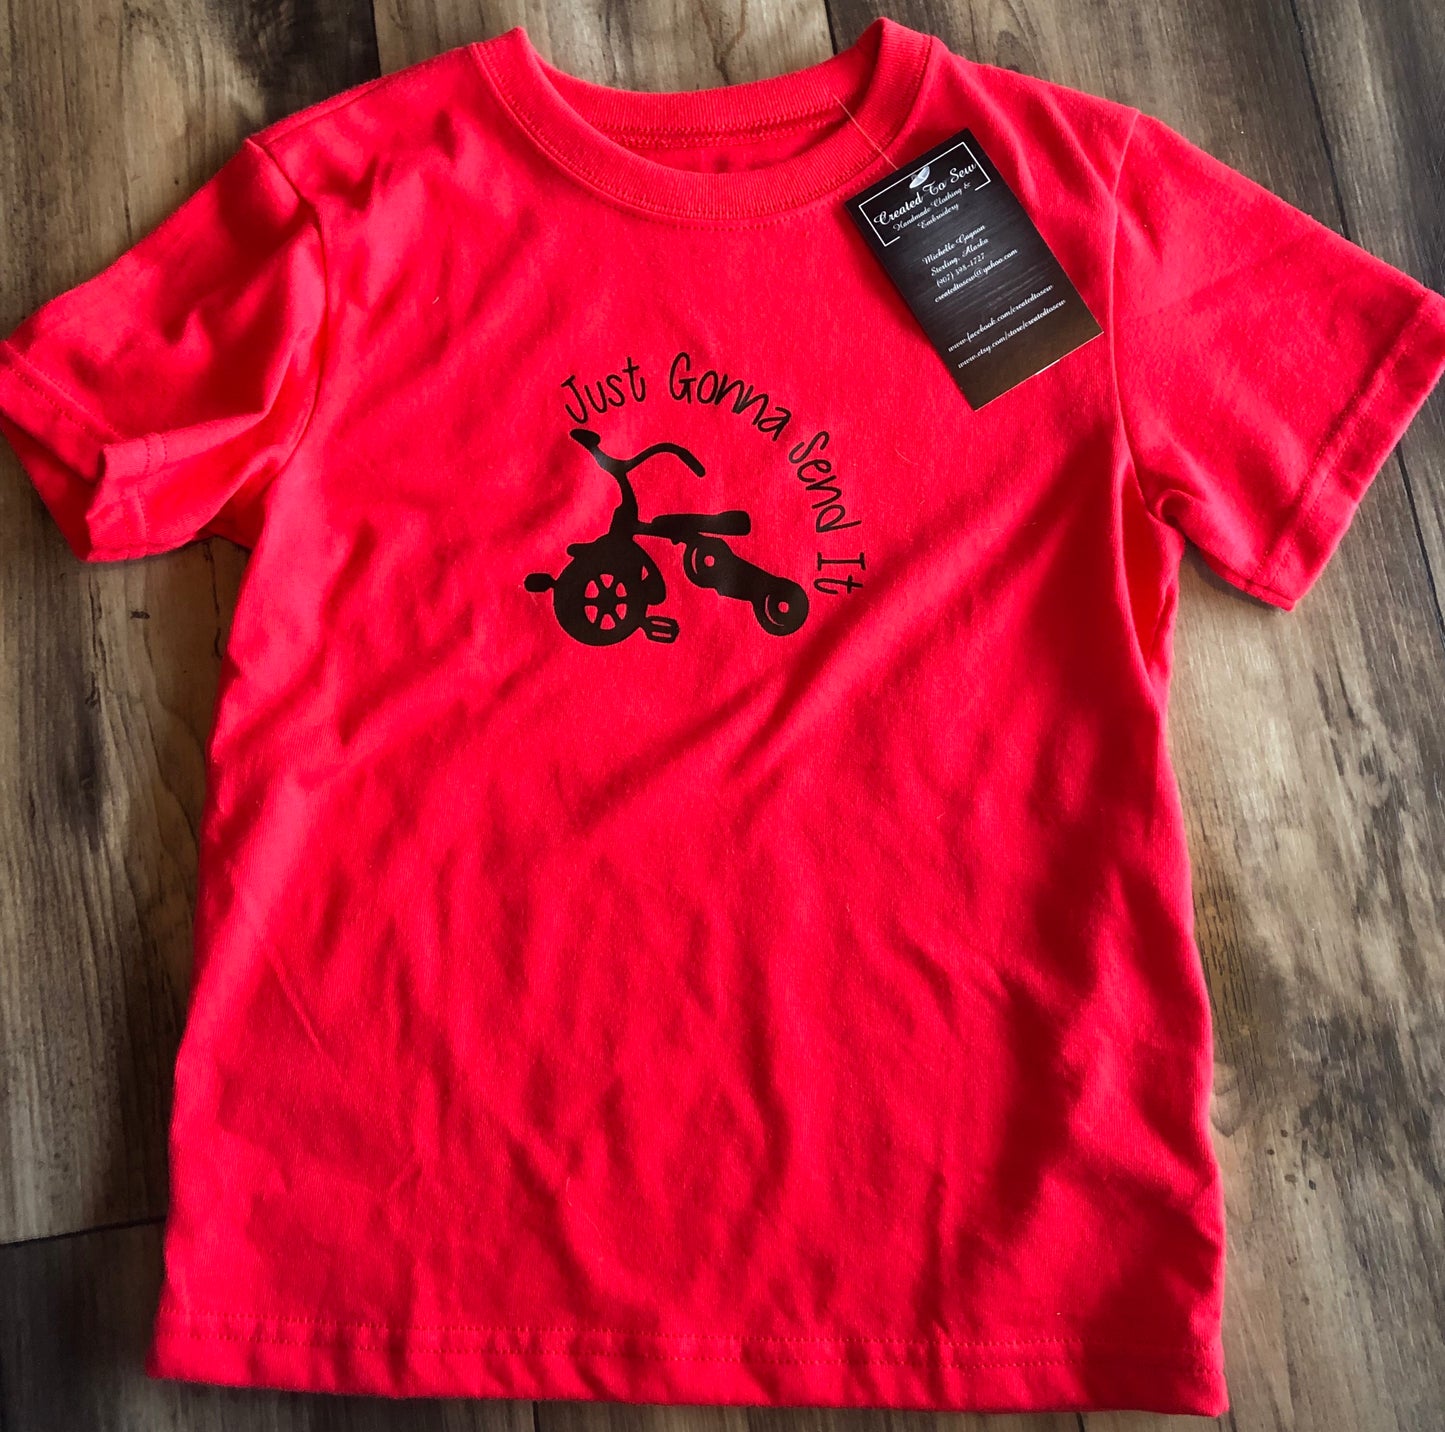 "Just Gonna Send It" Red T-Shirt Size 5T